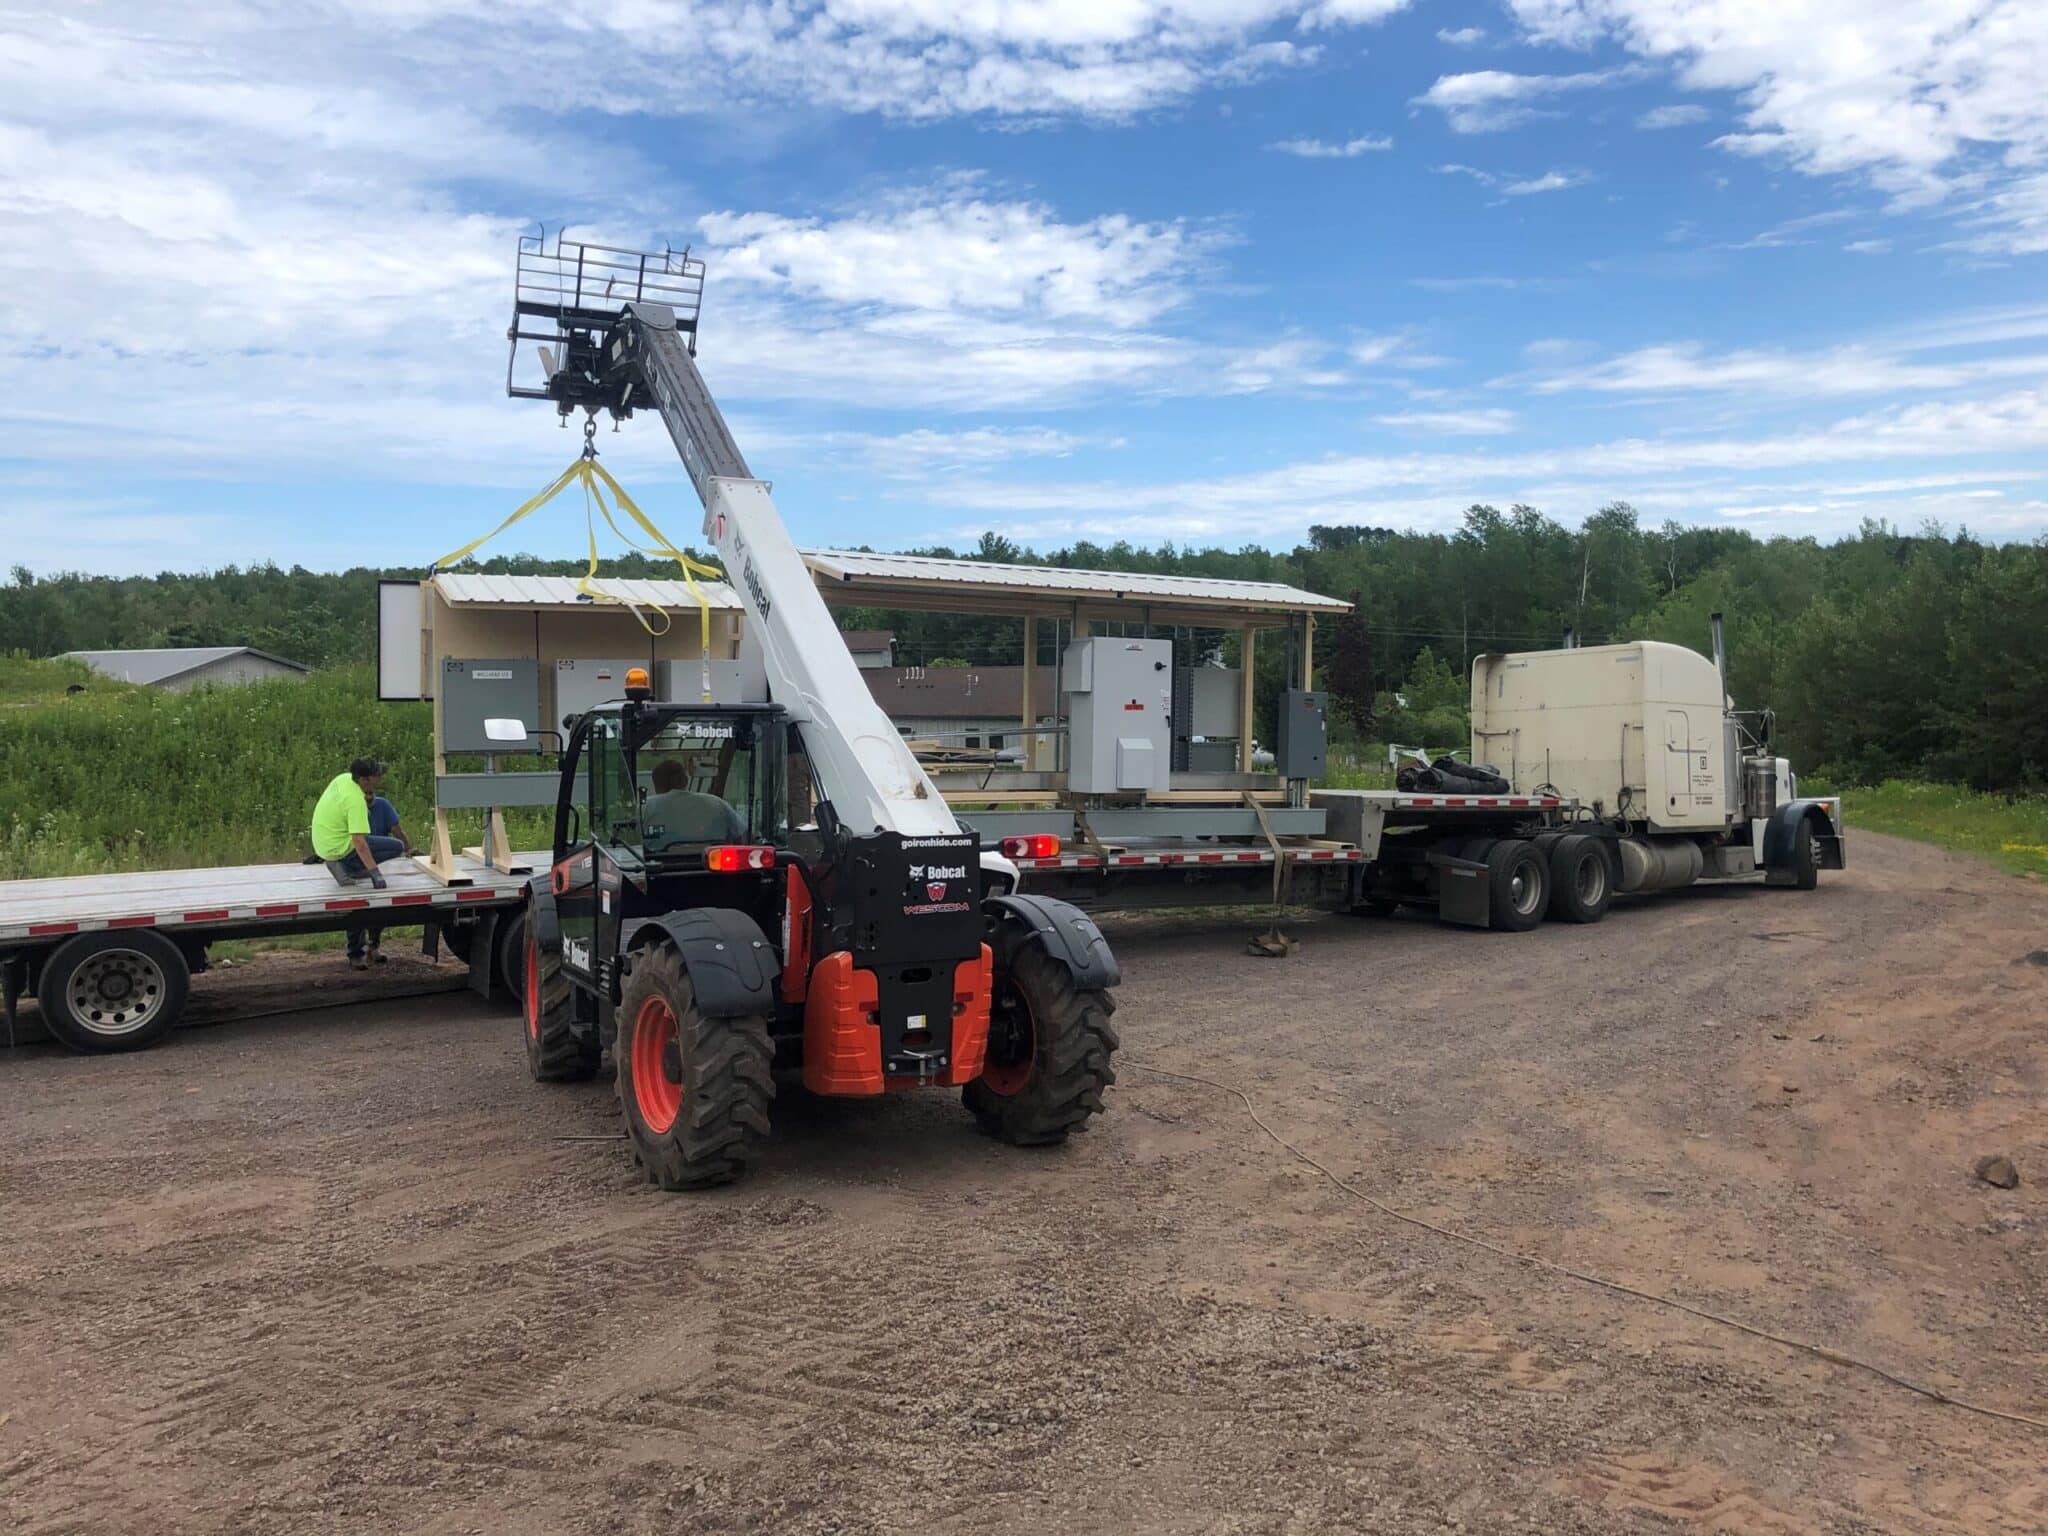 Loading an electrical skid from a semi truck to a crane